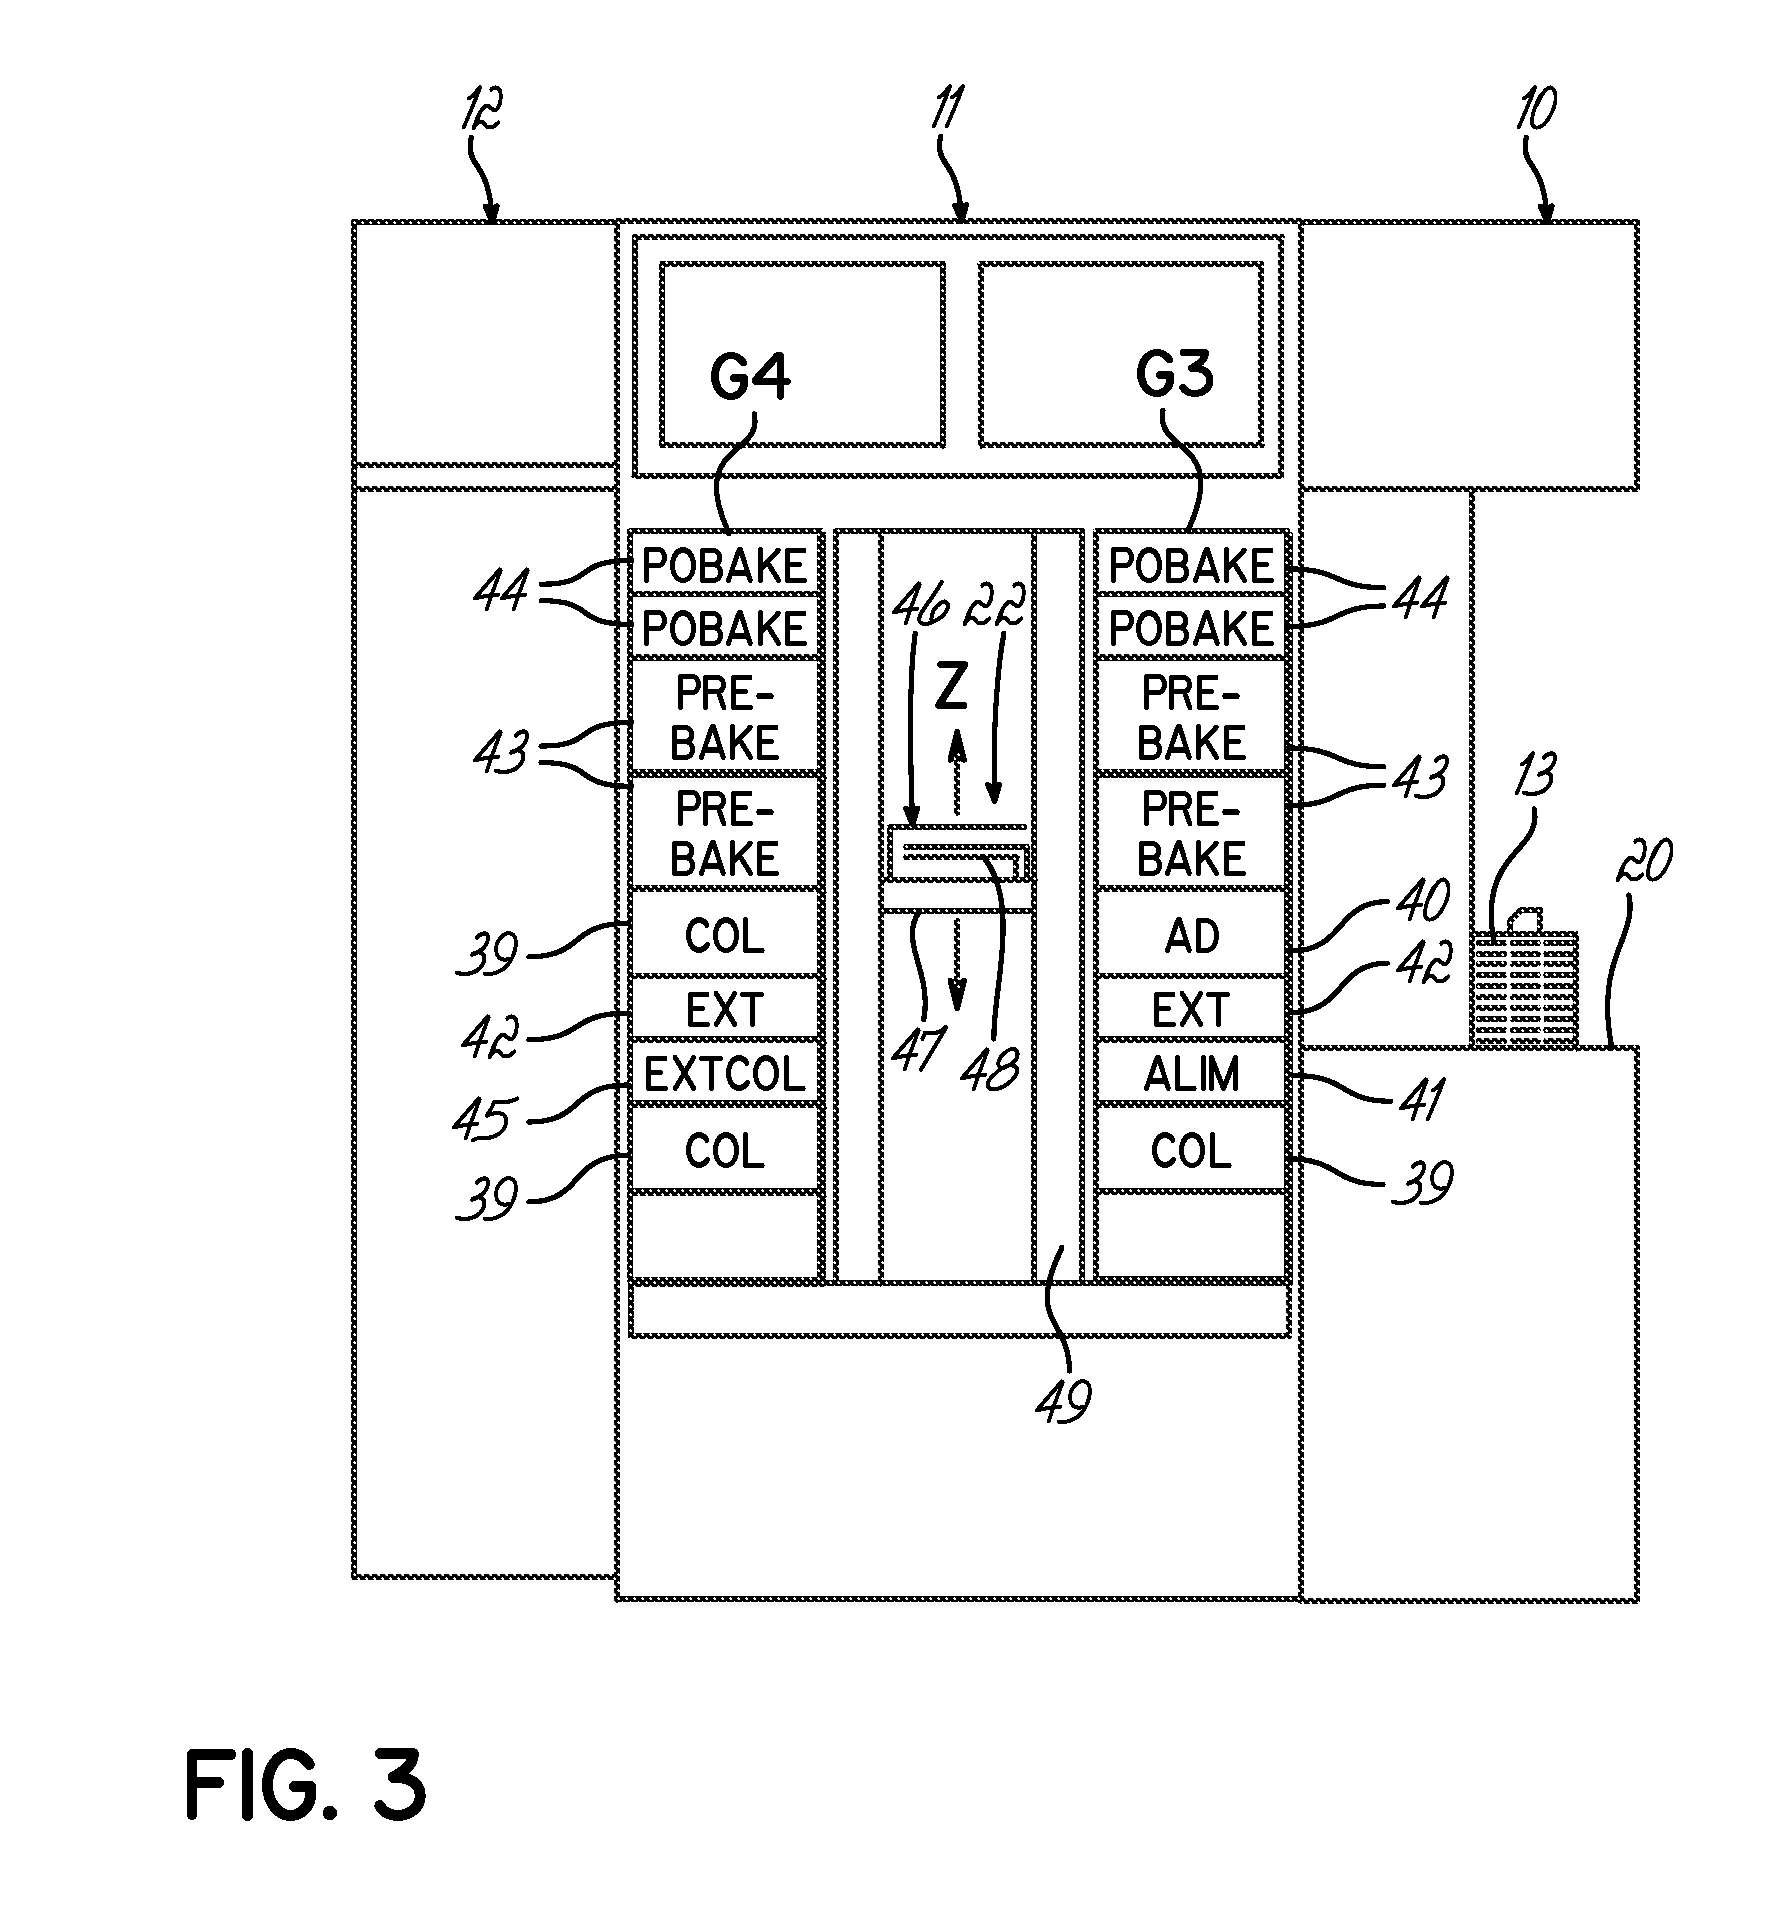 Methods and heat treatment apparatus for uniformly heating a substrate during a bake process